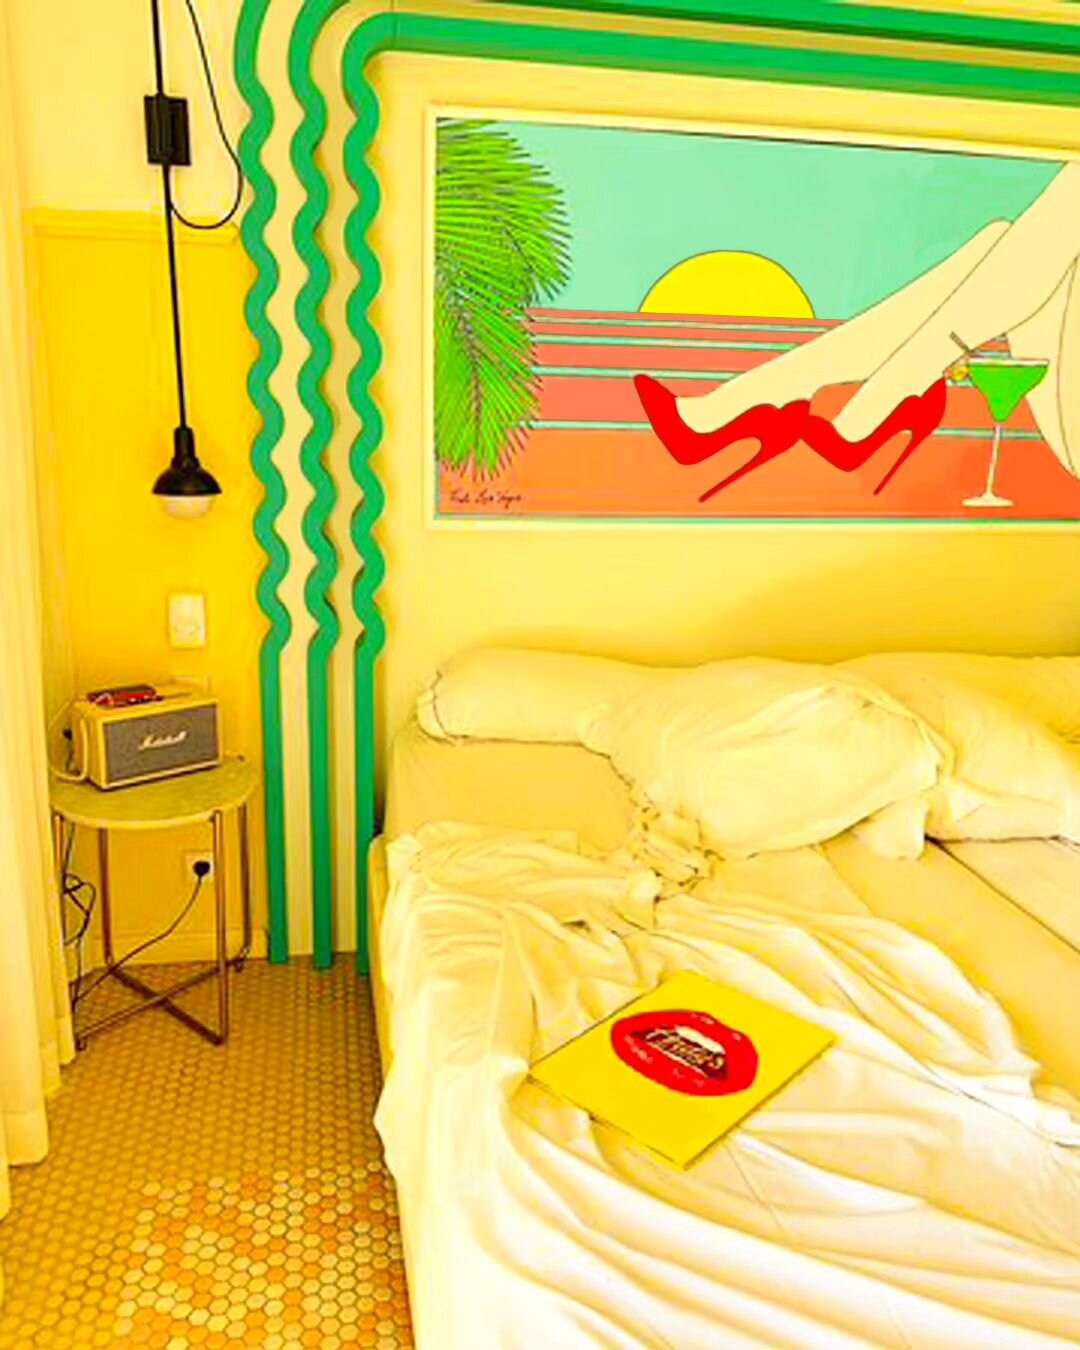 Postcards from Room 118 aka the @fridalasvegas suite at the Paradiso Art Hotel @paradiso_ibiza in its many sorbet moods &amp; colours ☀️🌴🍹 

Thanks to the @concept_hotel_group for commissioning this artwork and giving me the ultimate brief: &quot;D